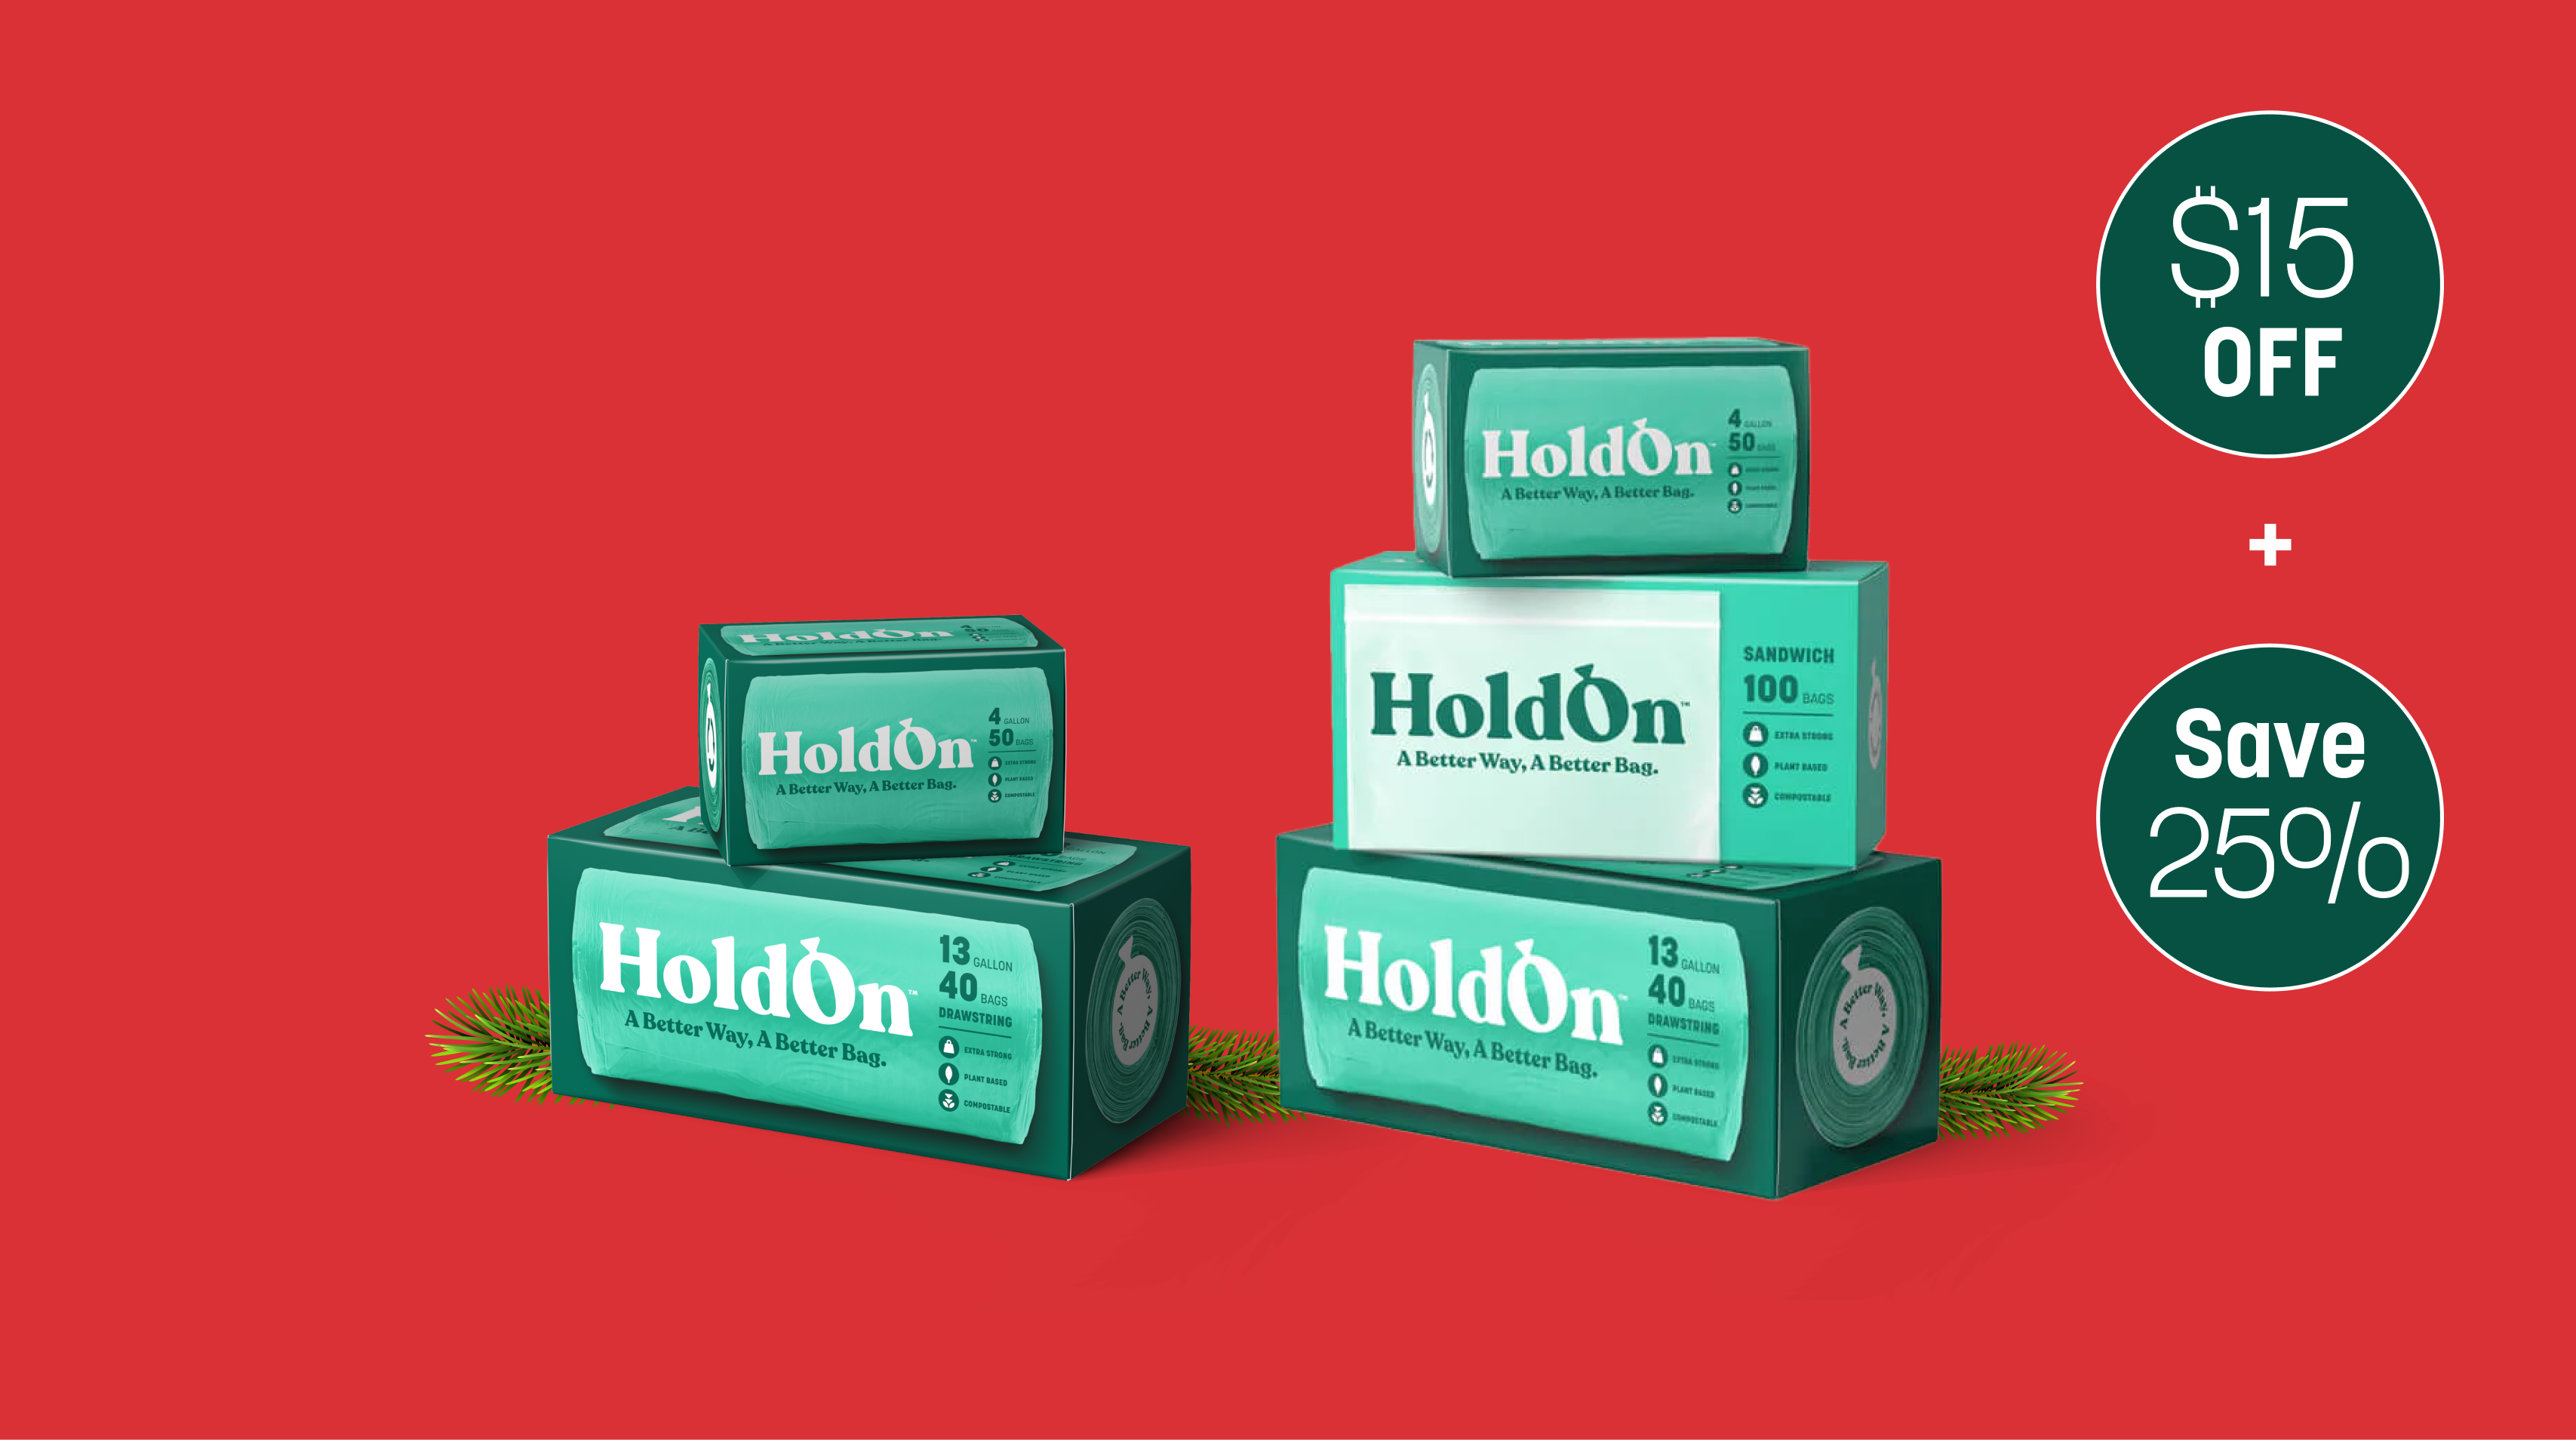 2-pack and 3-pack BYOB bundles on a red background.